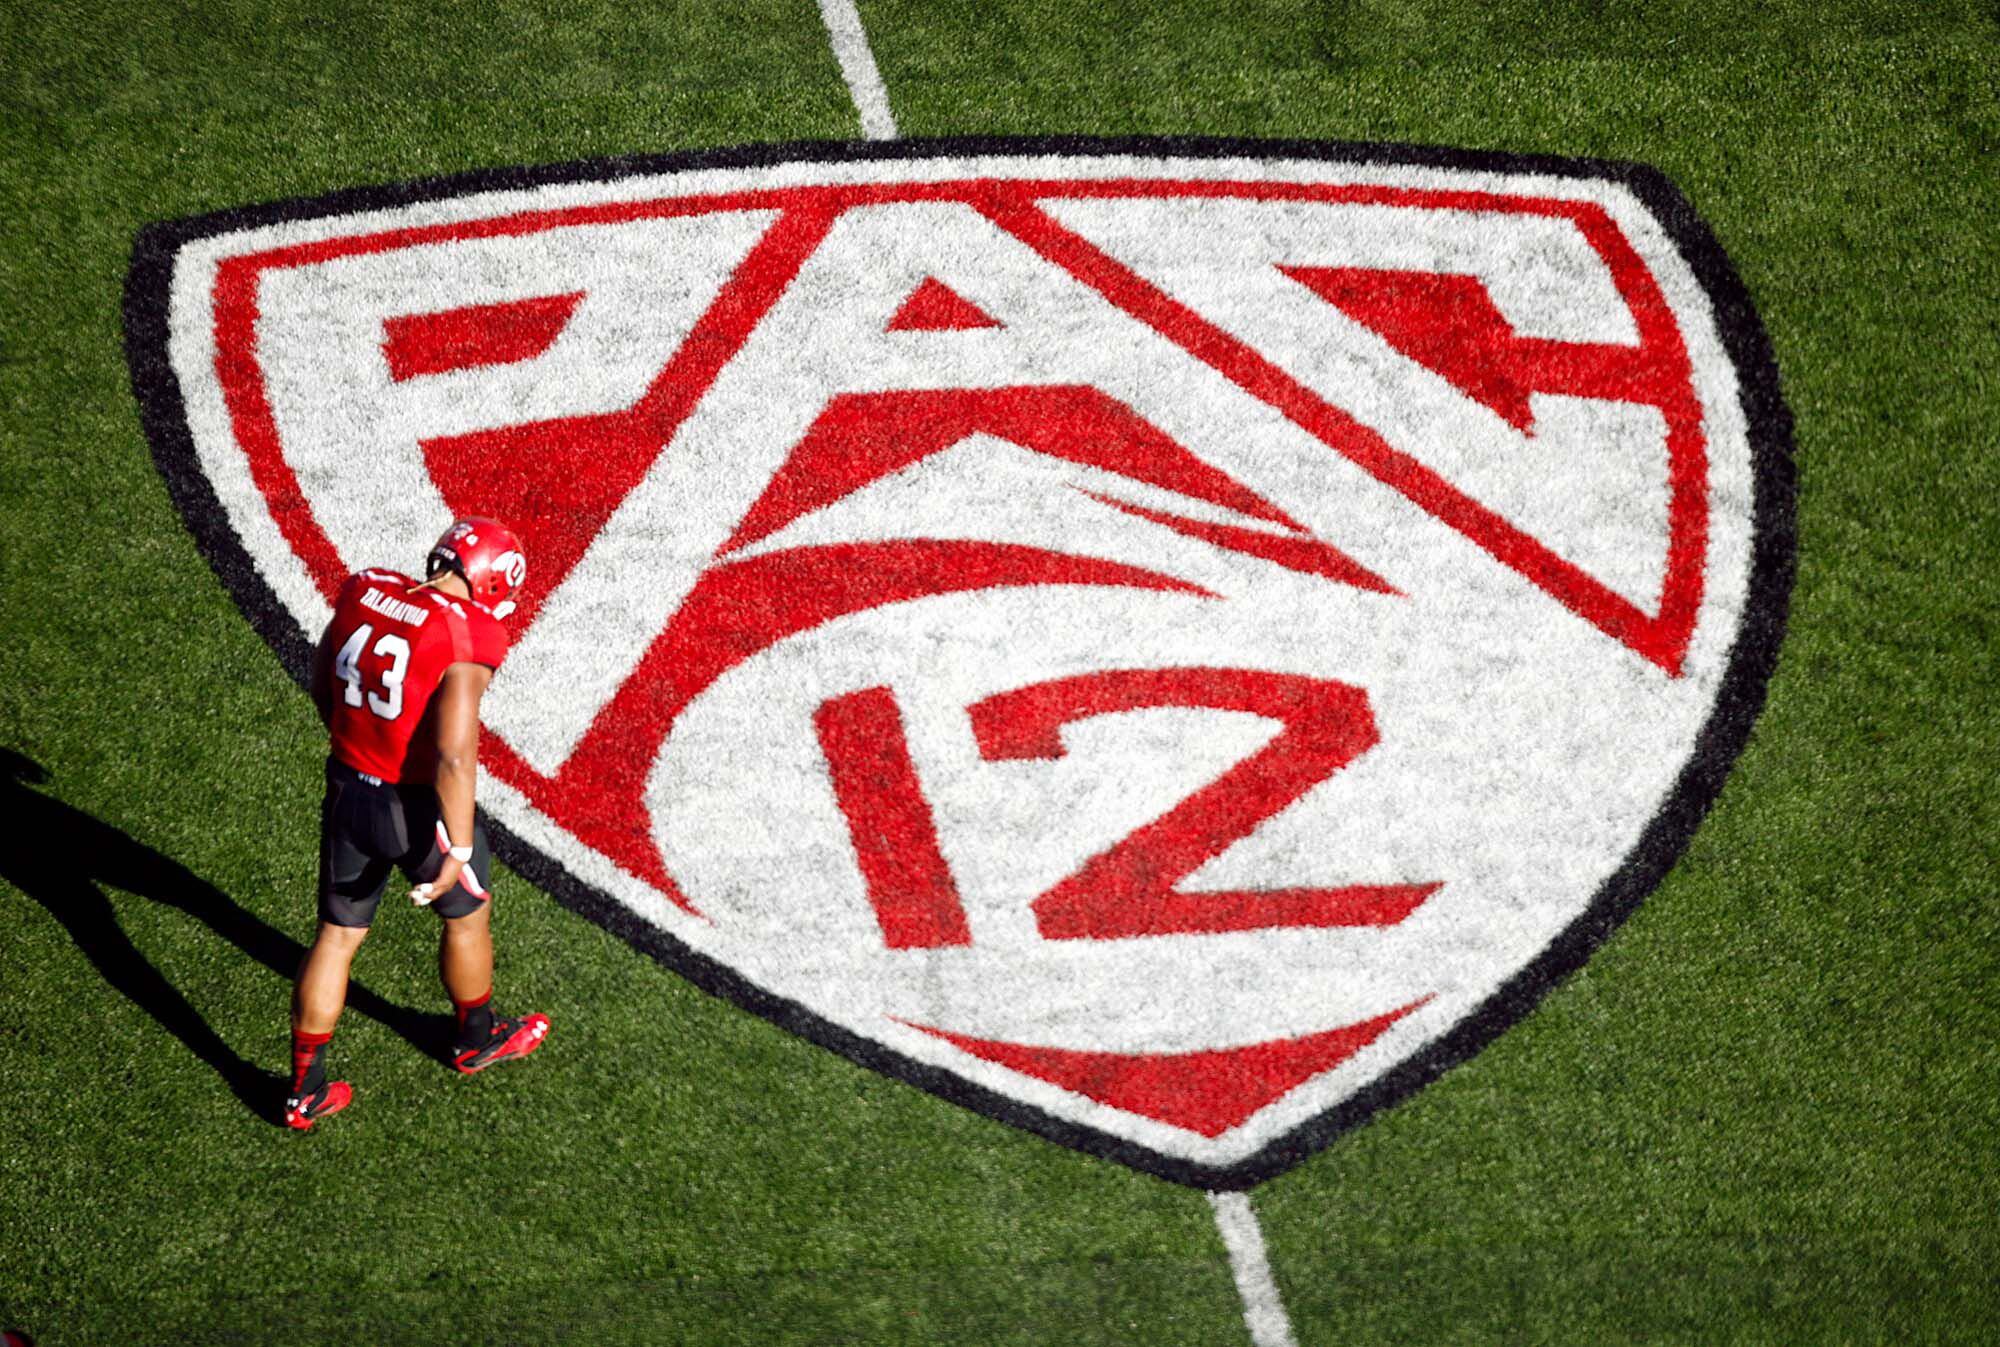 A look at the final drive for Pac-12 football